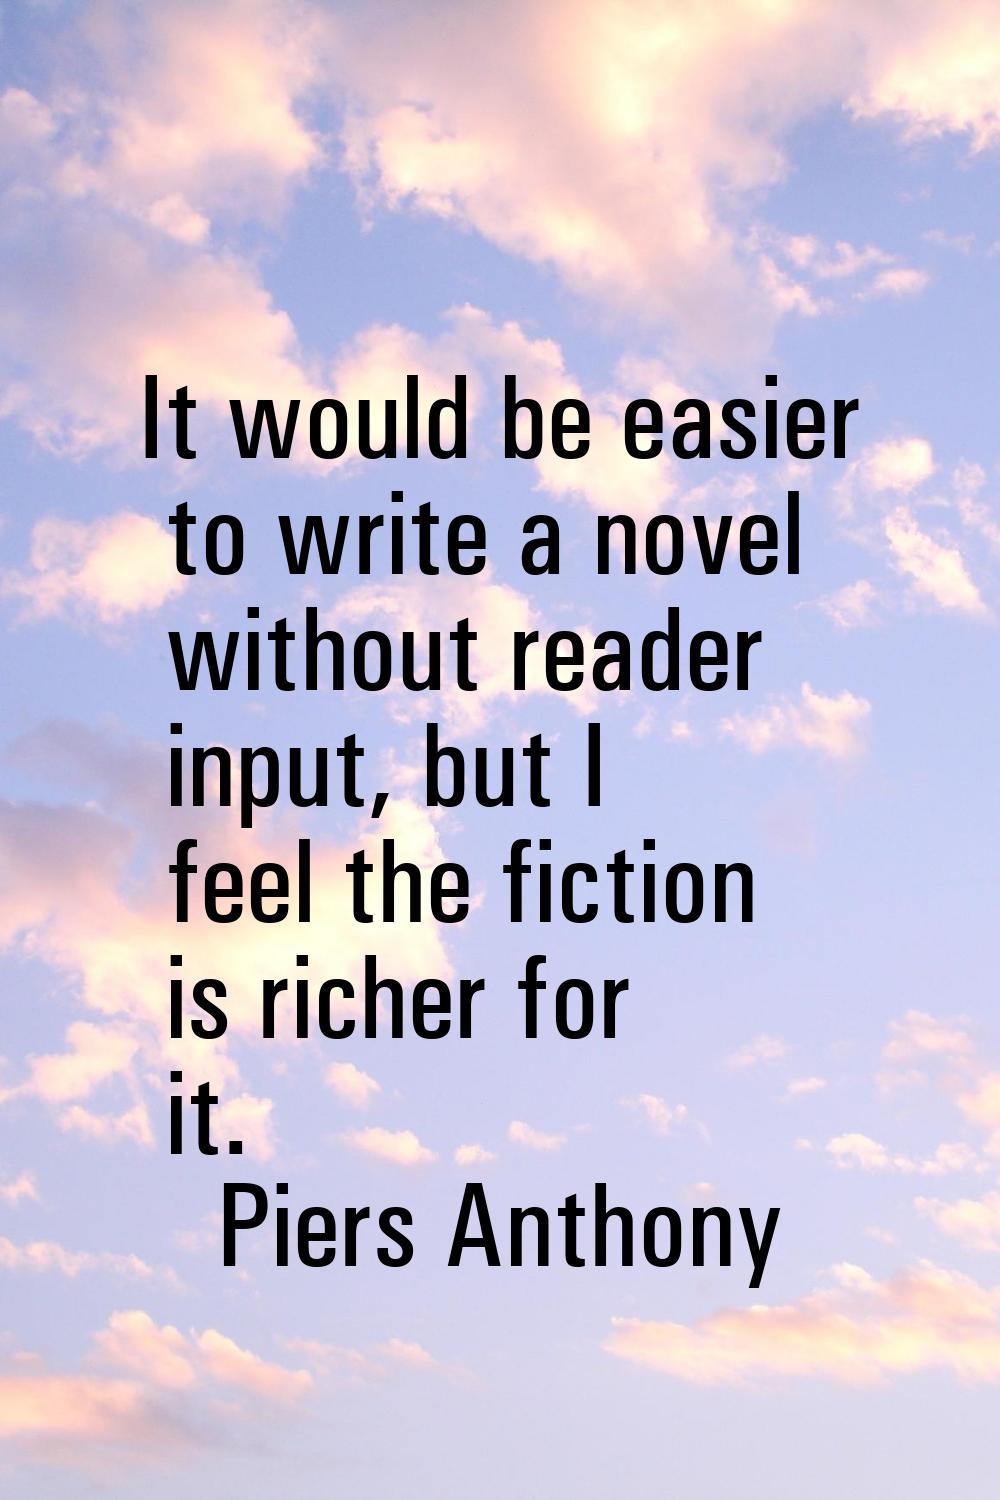 It would be easier to write a novel without reader input, but I feel the fiction is richer for it.